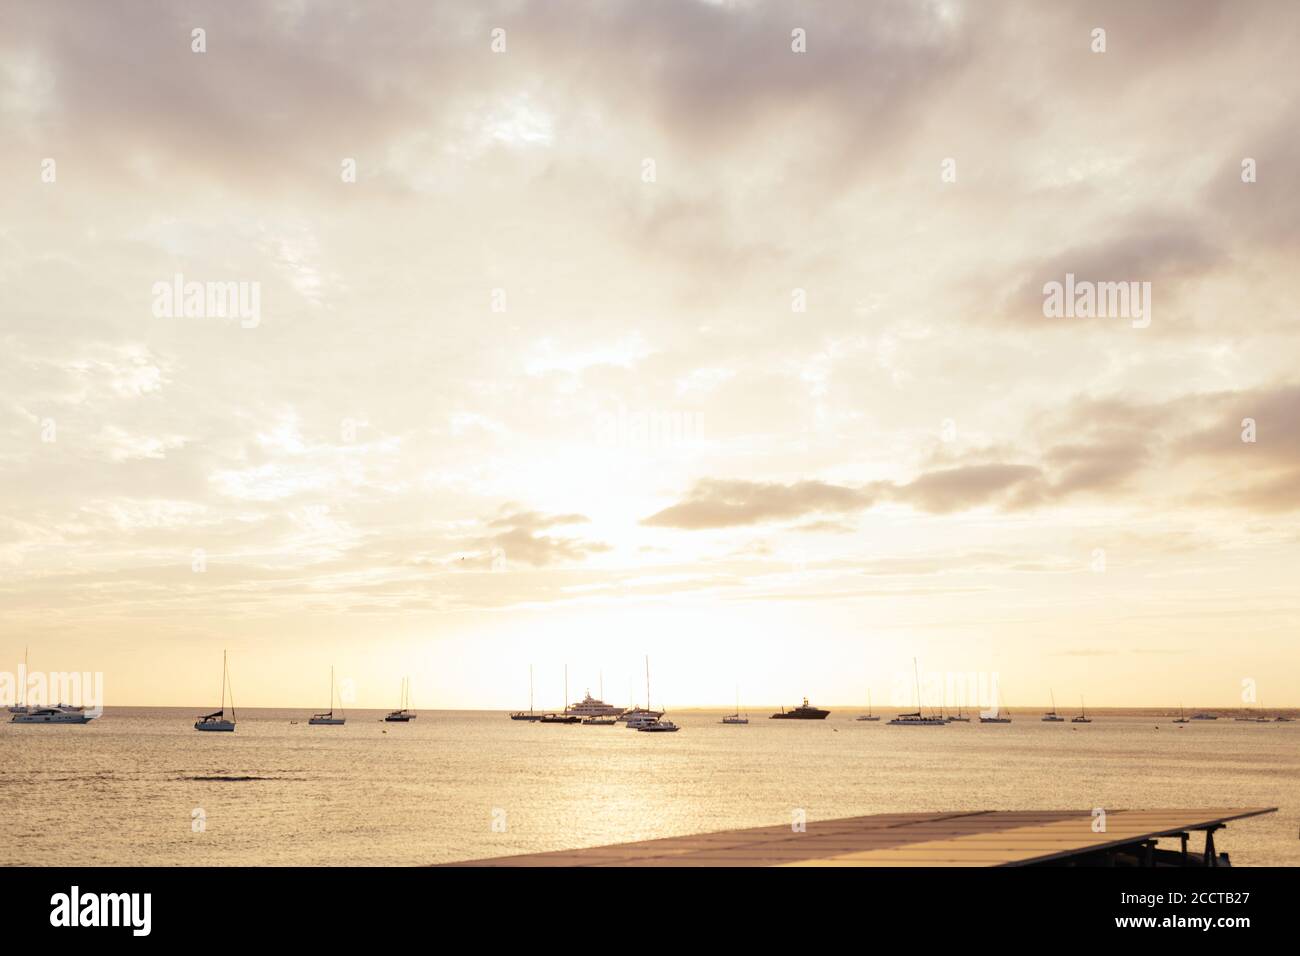 Sunset with boats on a beach in Mallorca Stock Photo